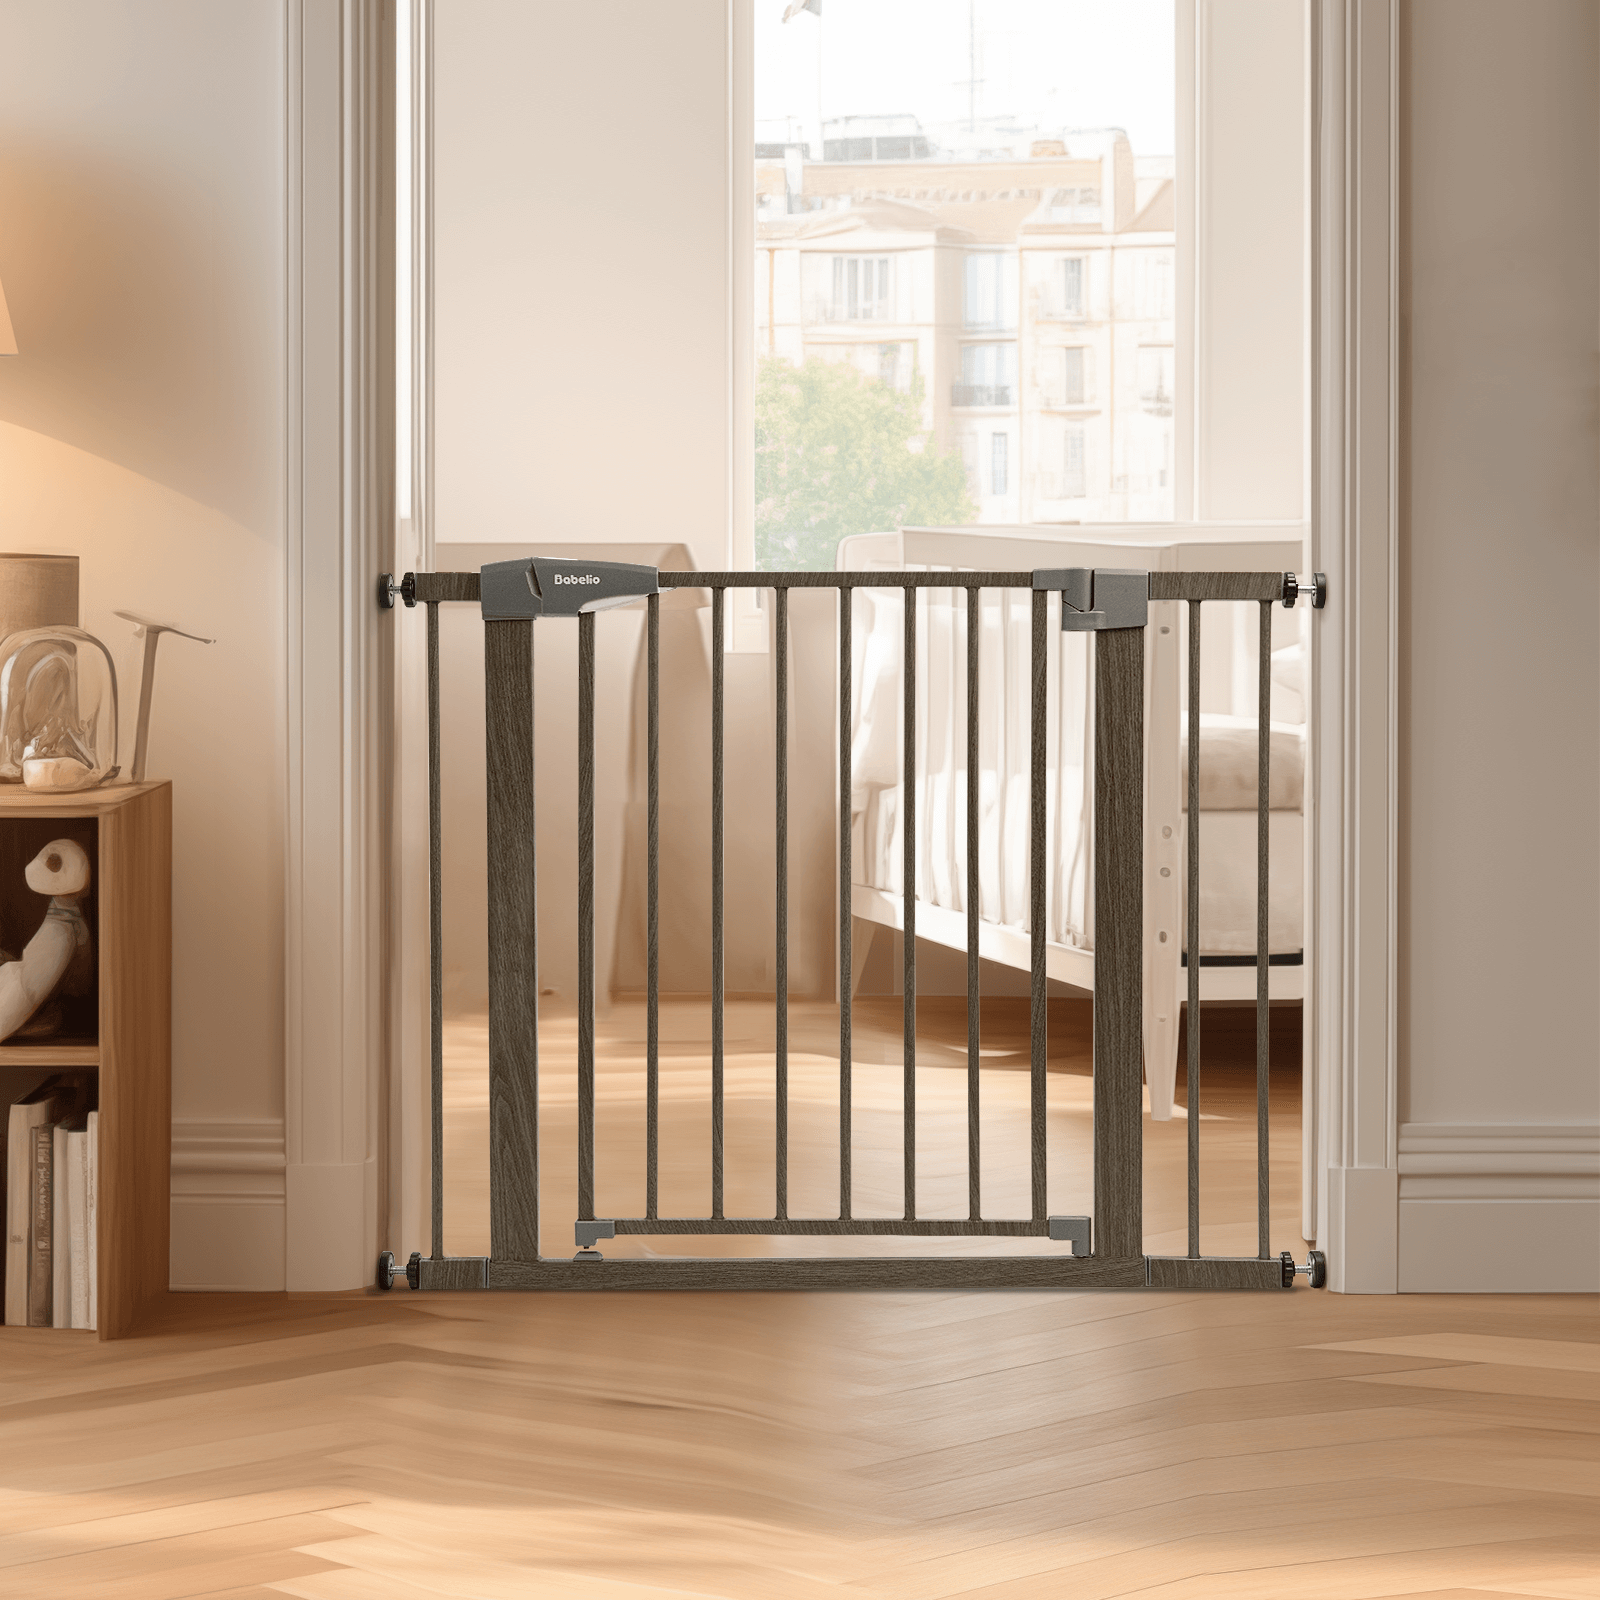 Babelio 29-40" Metal Baby Gate, Easy Install Pressure Mounted Dog Gate, Ideal for Stairs and Doorways